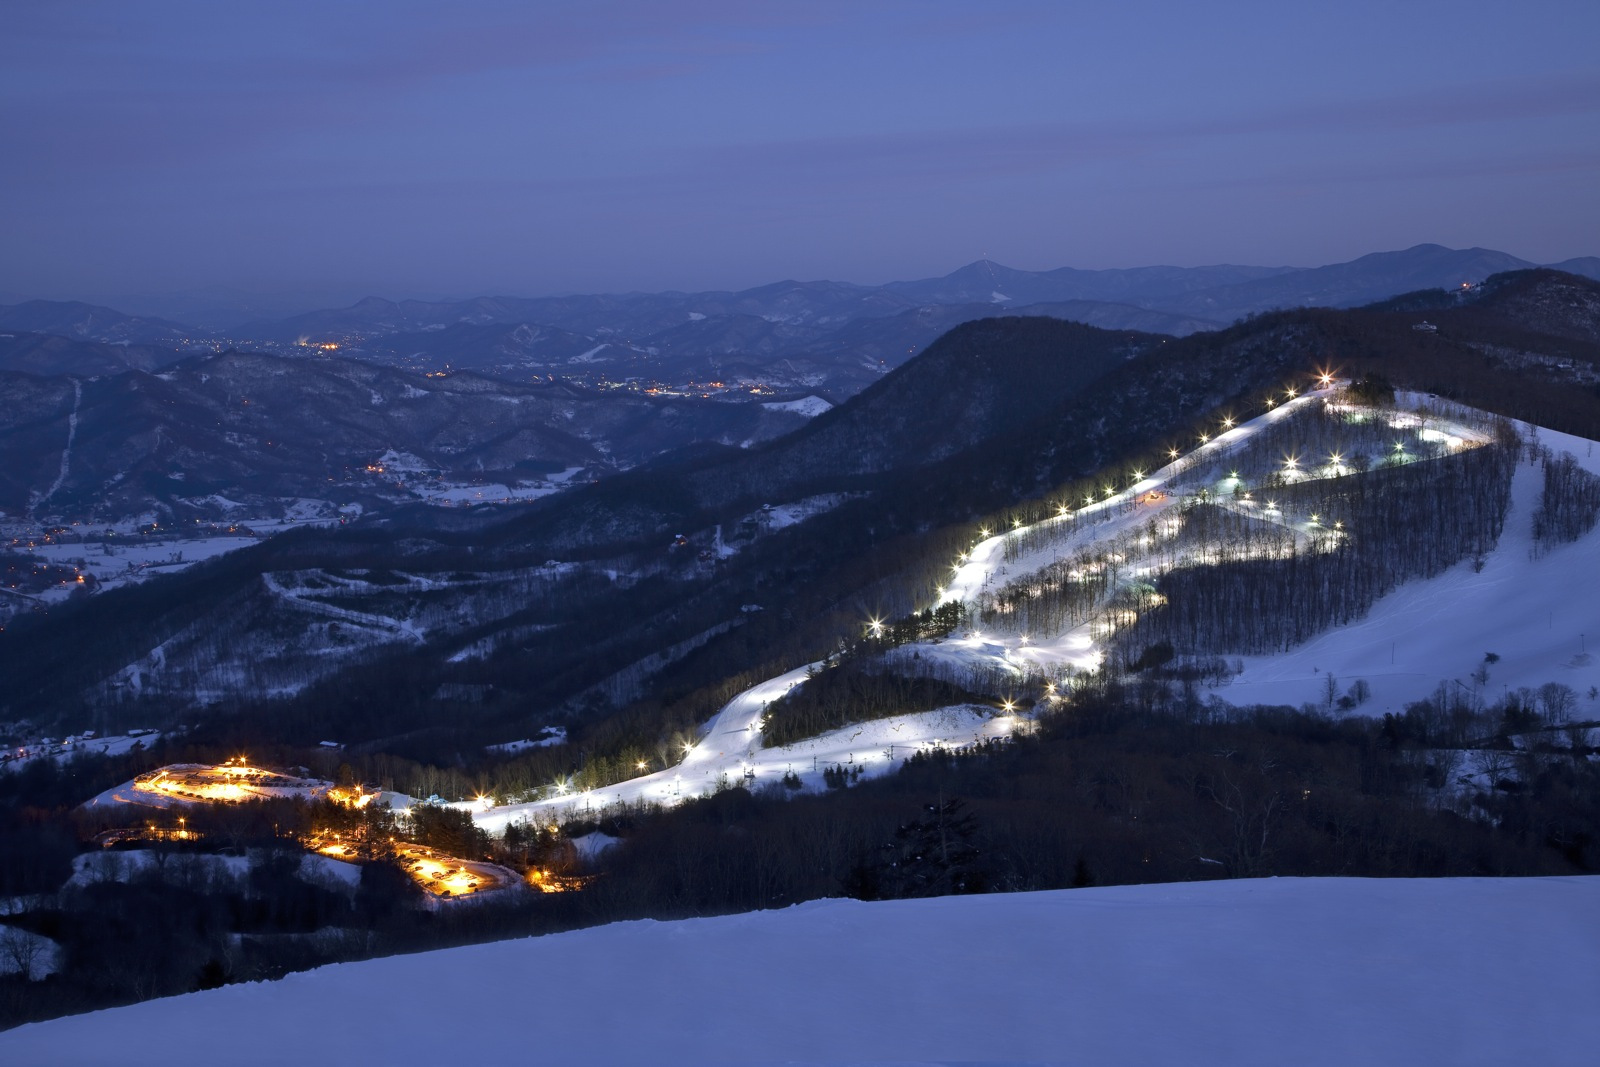 Cataloochee ski area in North Carolina offers night skiing to its guests. Another Indy Pass partner. The Indy Pass will get you skiing for just USD 199 at North America’s authentic independent resorts.